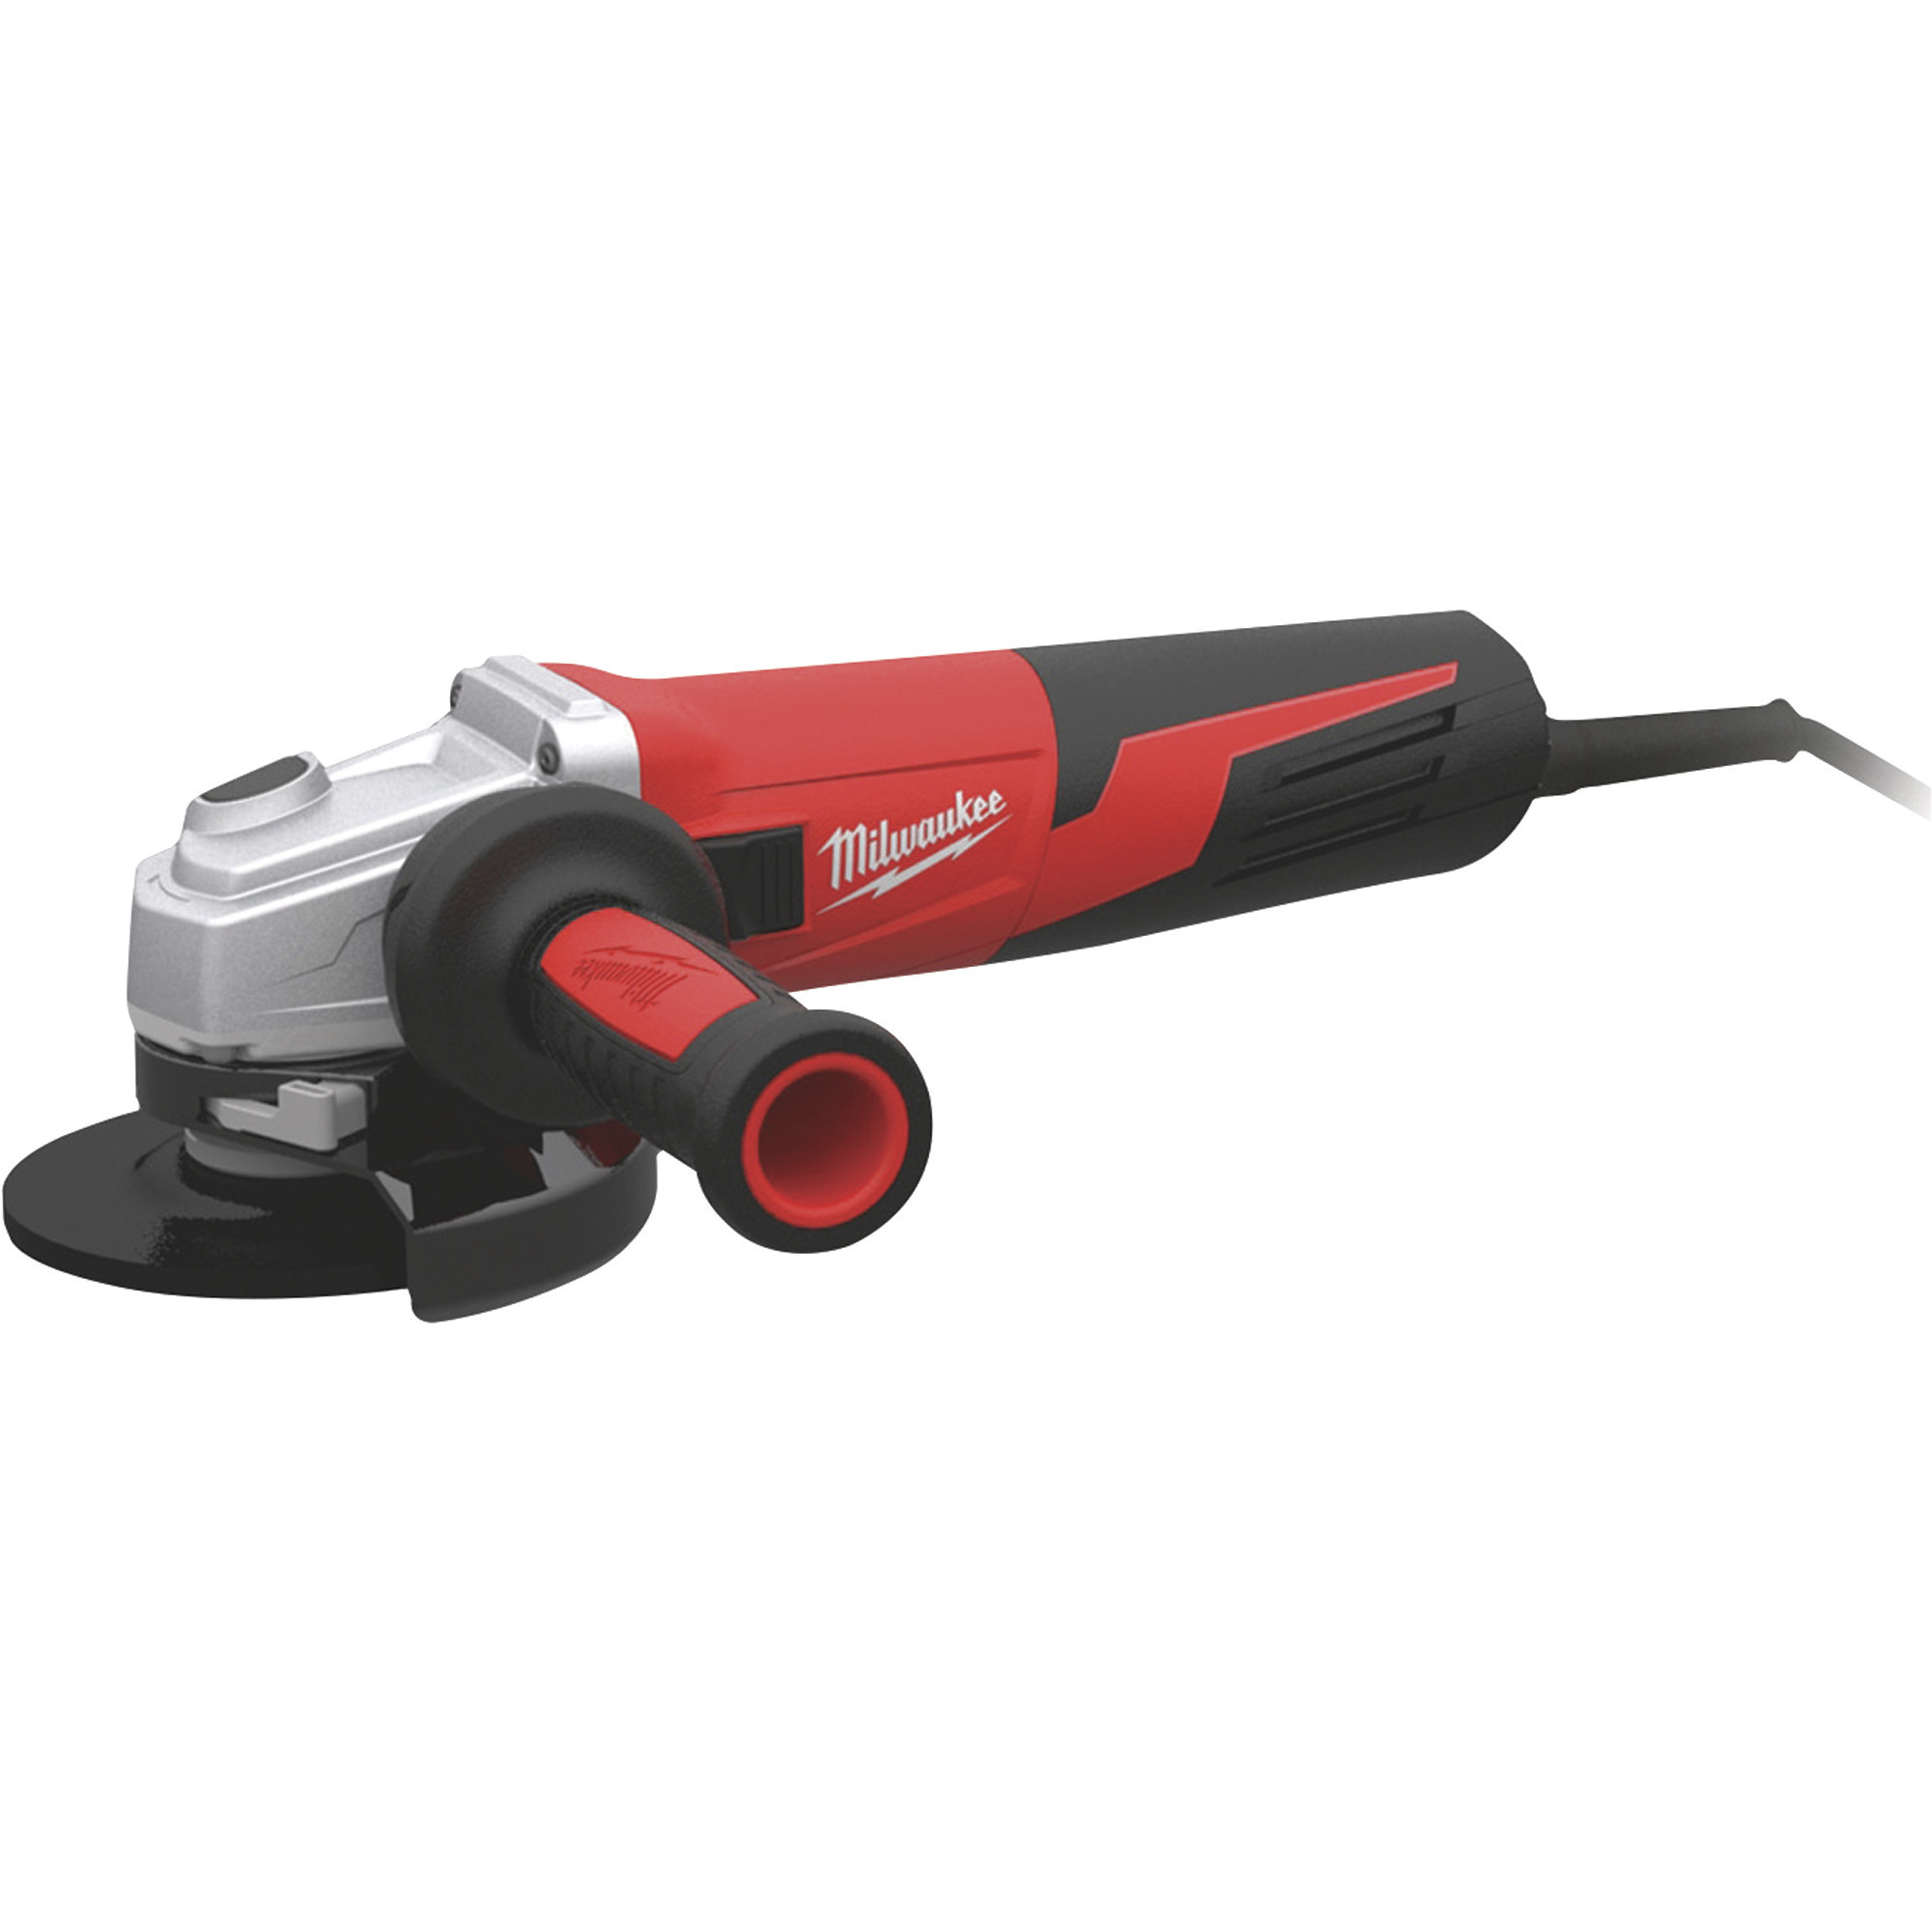 Milwaukee 6Inch Grinder, 13 Amp, 9000 RPM, Paddle, Non-Locking, Clutch, Model 6161-31